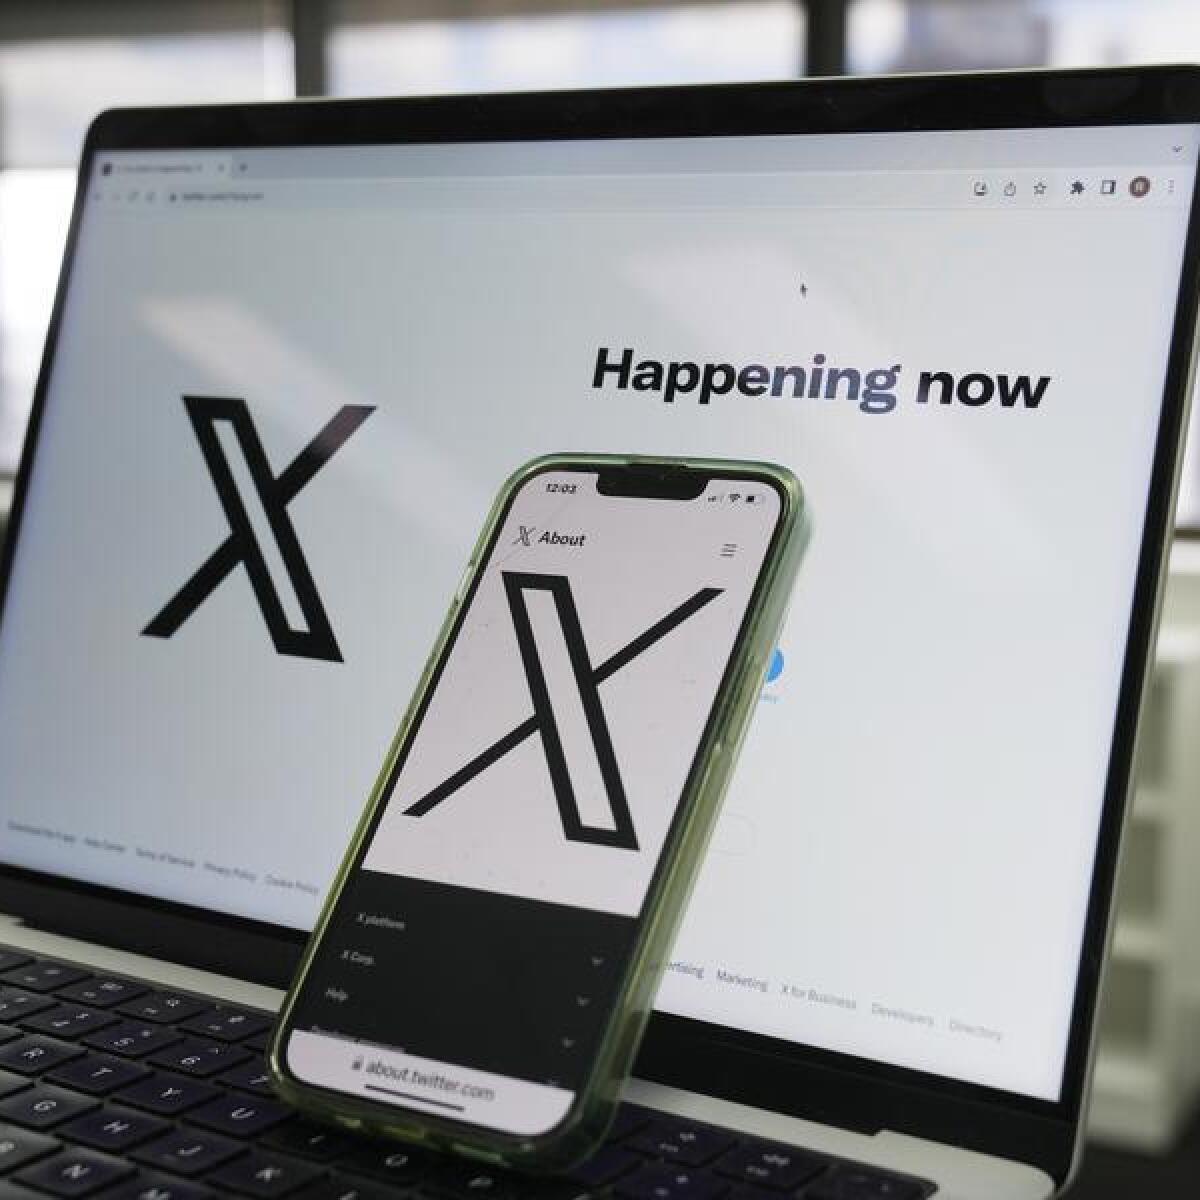 The opening page of X is displayed on a computer and phone.